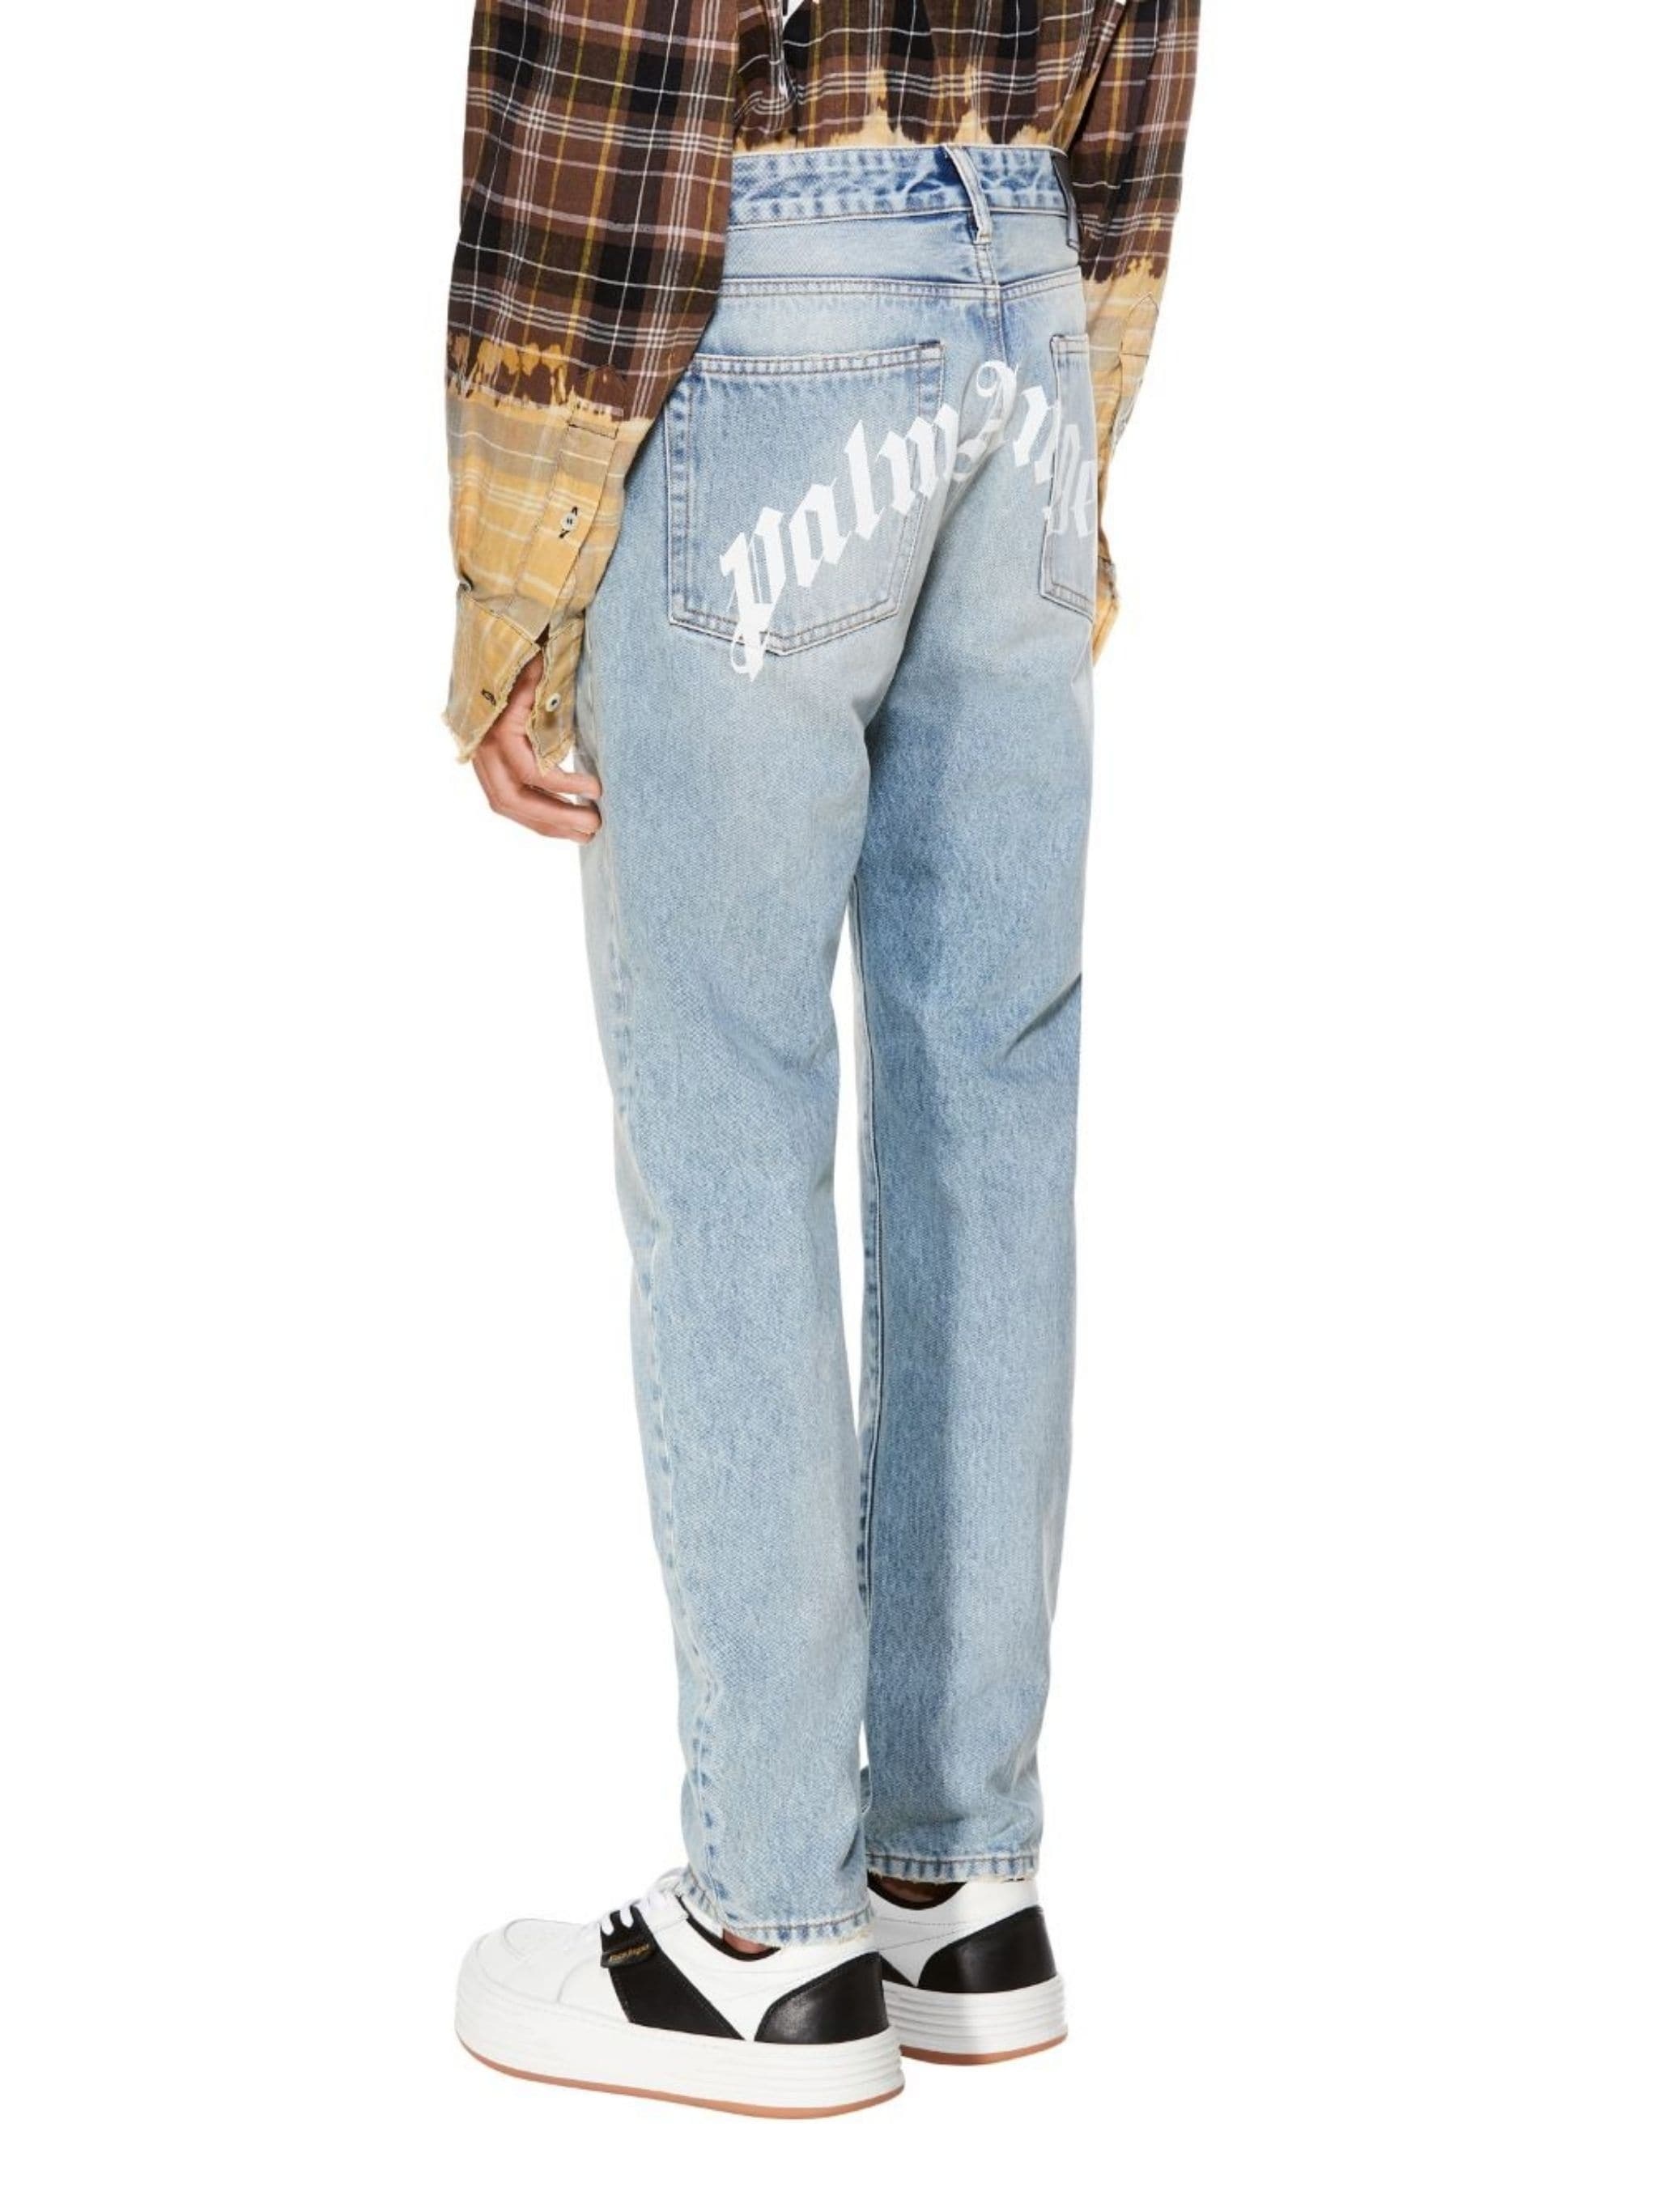 curved-logo print jeans - 5